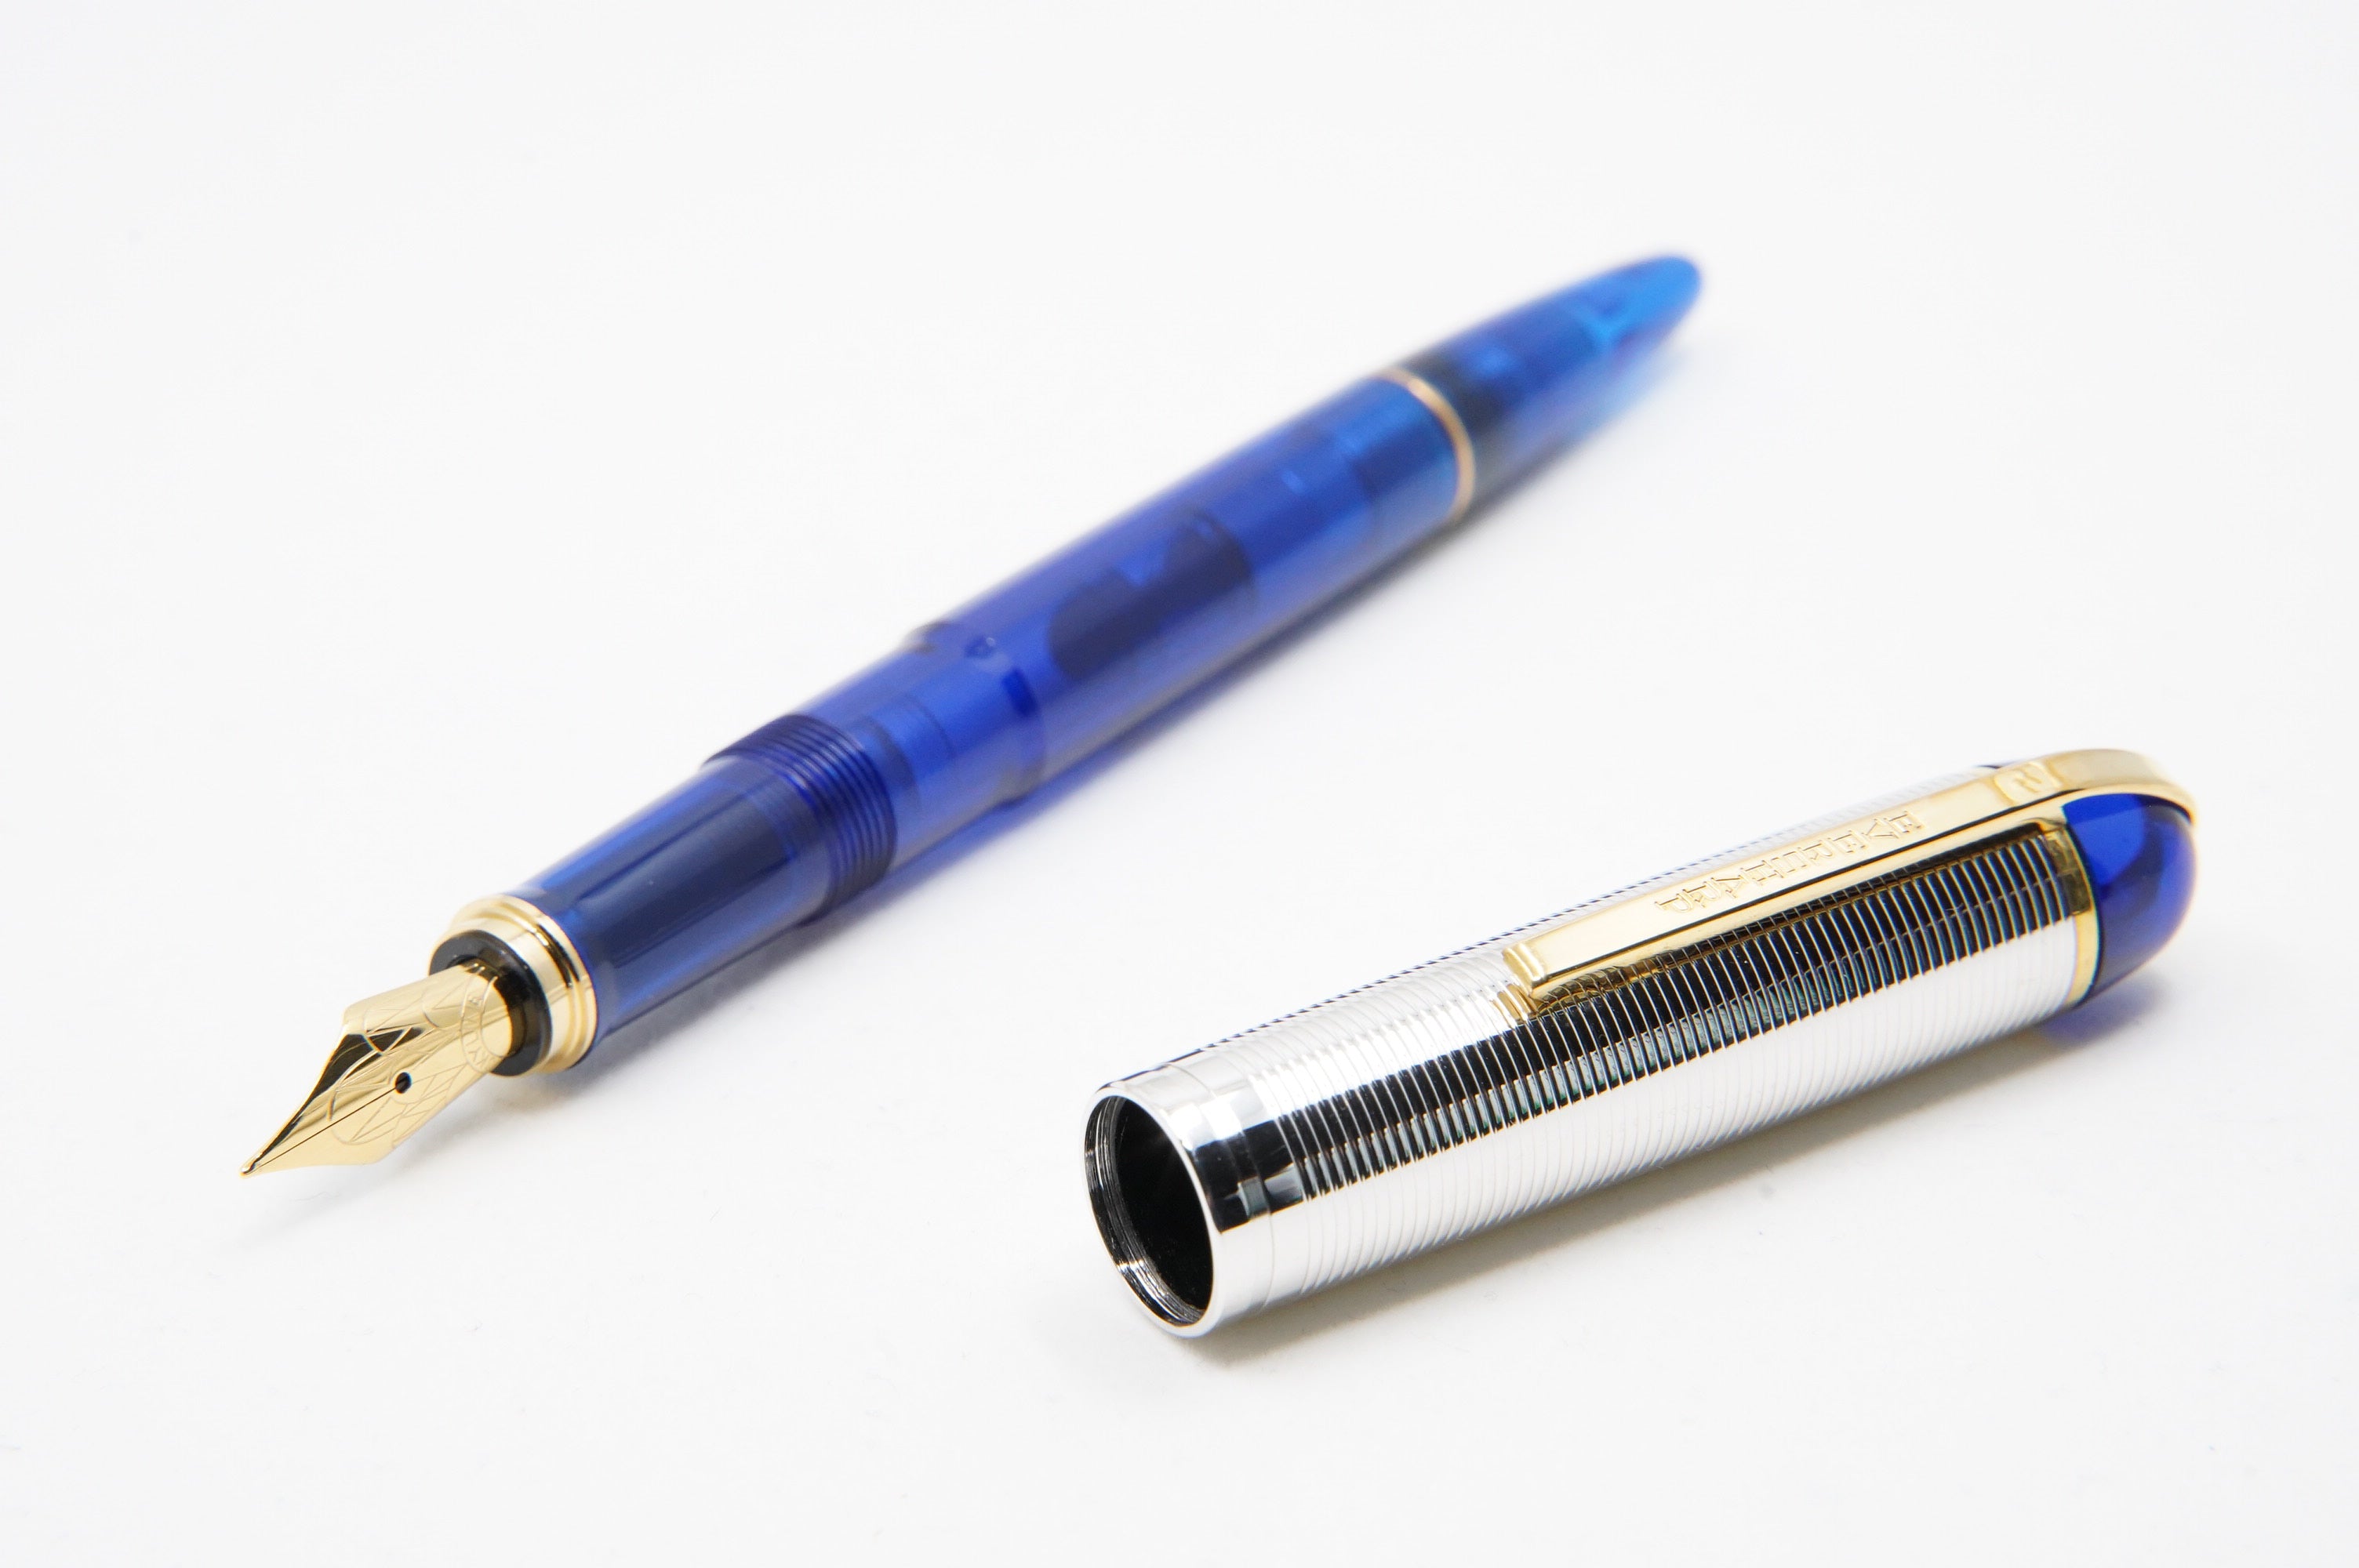 Wahl Eversharp Skyline FP Blue Demo - The iconic SKYLINE created by Henry Dreyfus in 1939